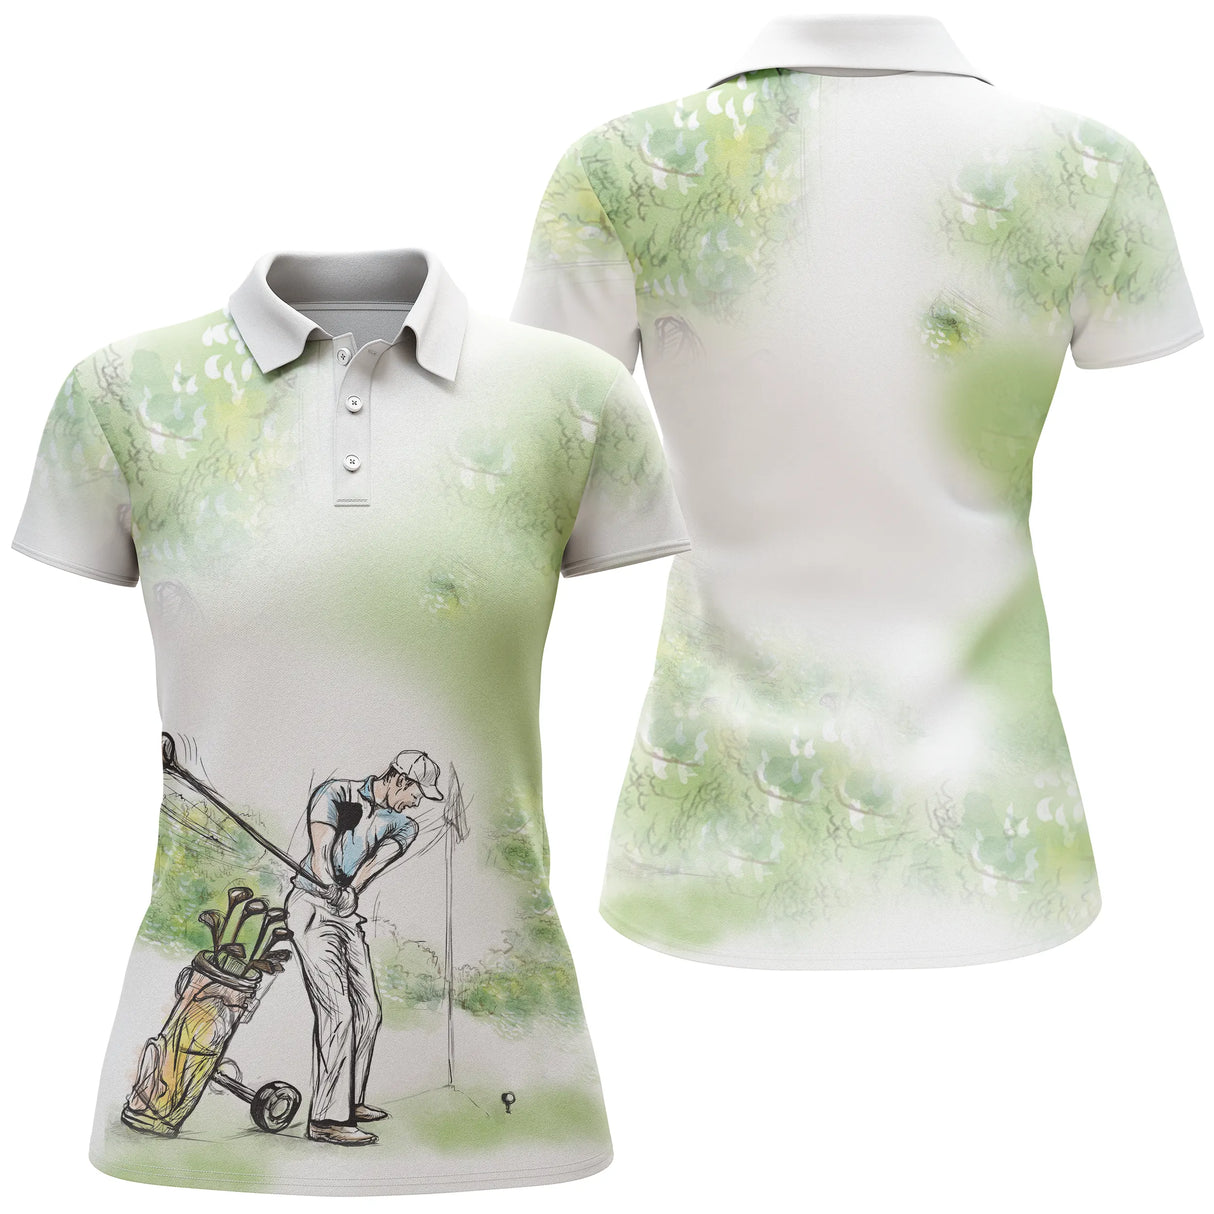 Chiptshirts - Golf Polo Shirt, Original Gift for Golf Fans, Men's and Women's Sports Polo Shirt, Golf Course, Nature Green - CTS26052230